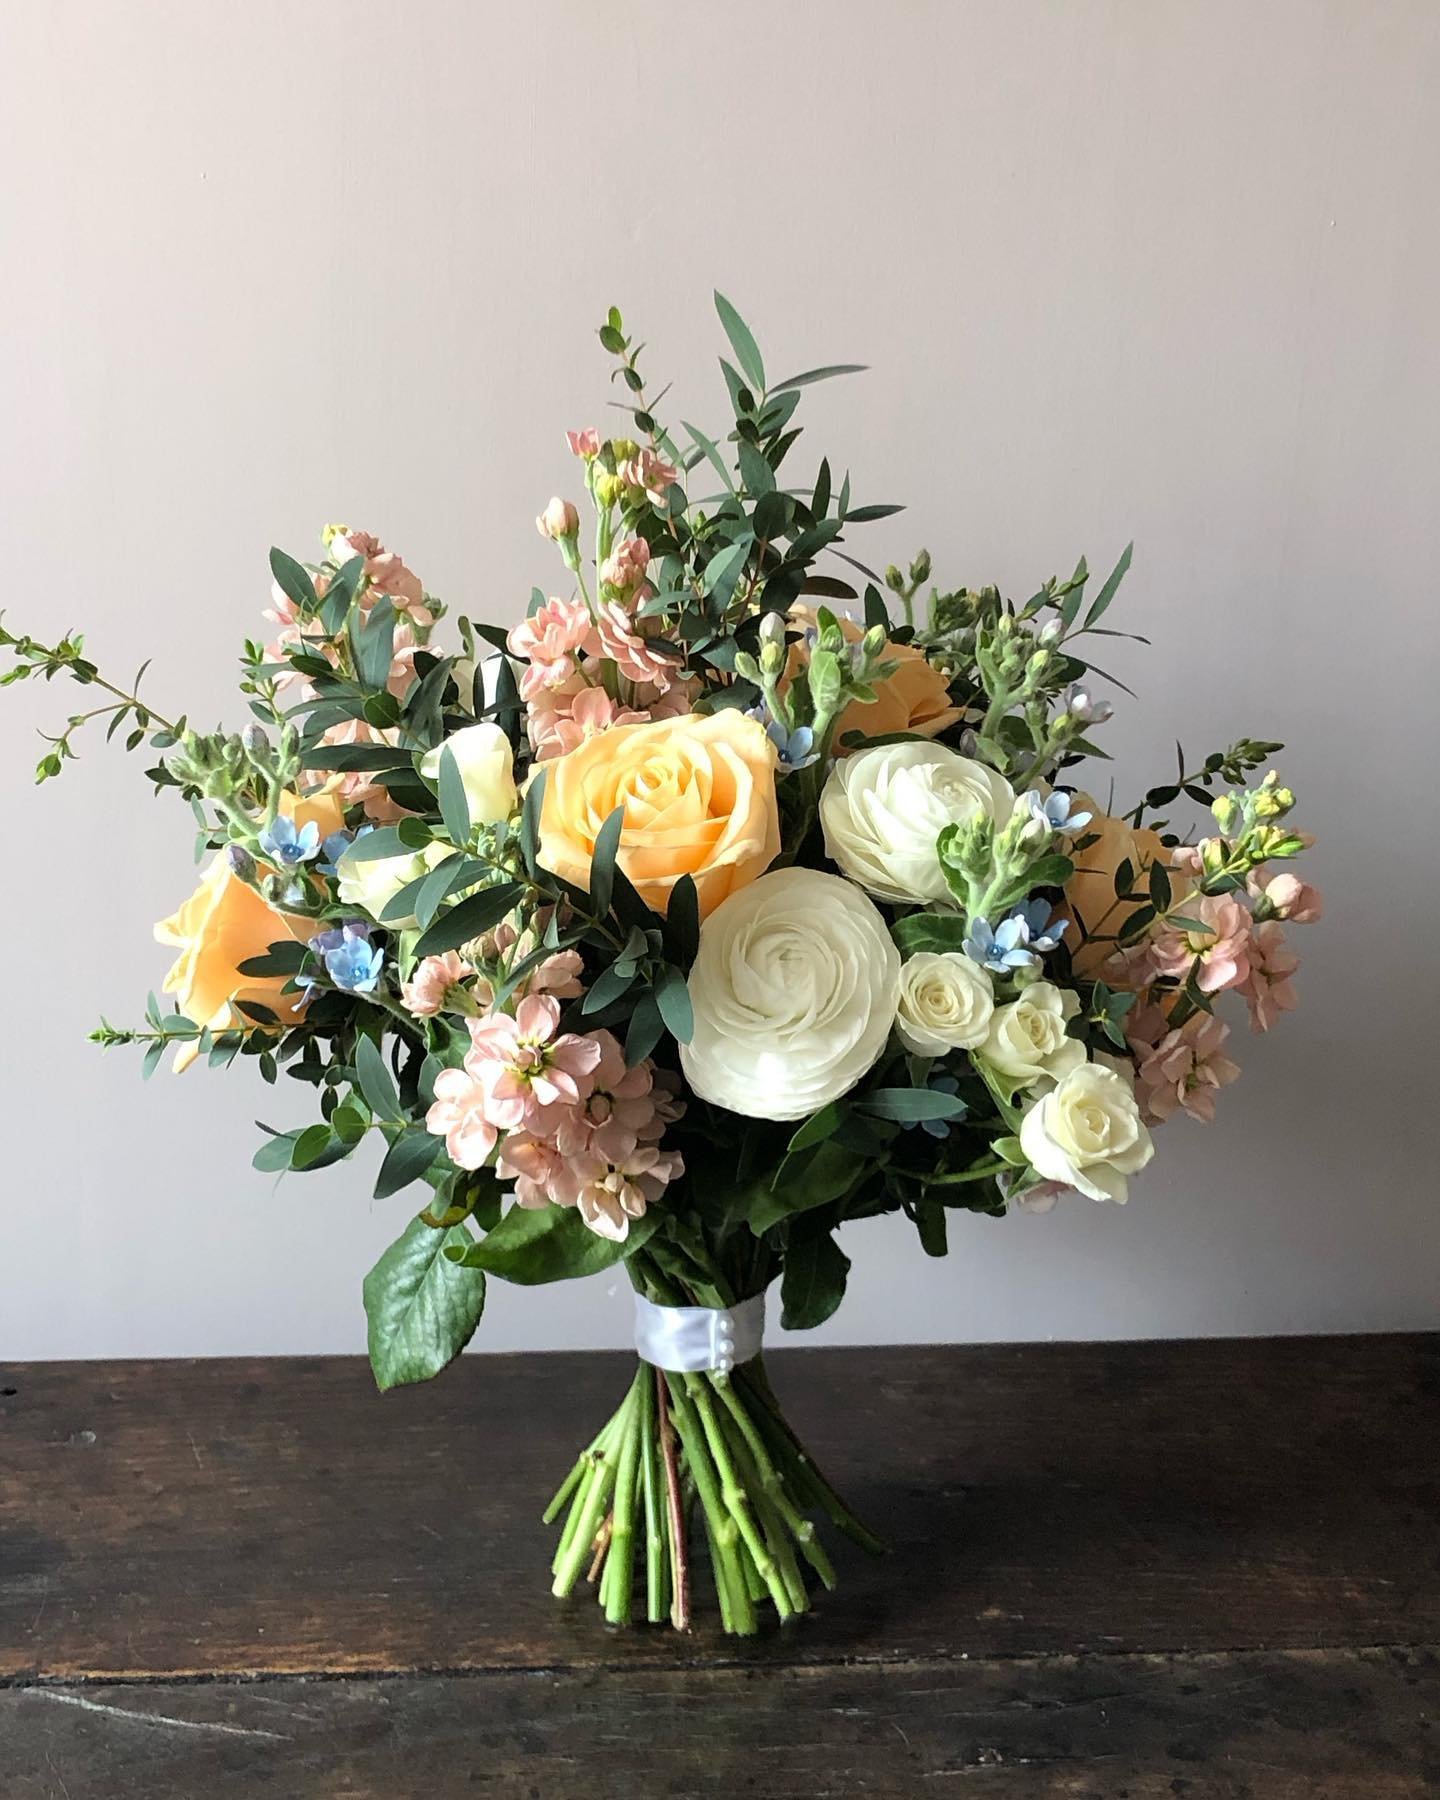 For Charlotte @warwick_house today, featuring the most stunning apricot Stocks. And what a beautiful day for a Spring wedding - many congratulations both 🥂 .
.
.
#jh_floraldesign #stratforduponavon #wreaths #florist #flowers #flowersinstagram #flora